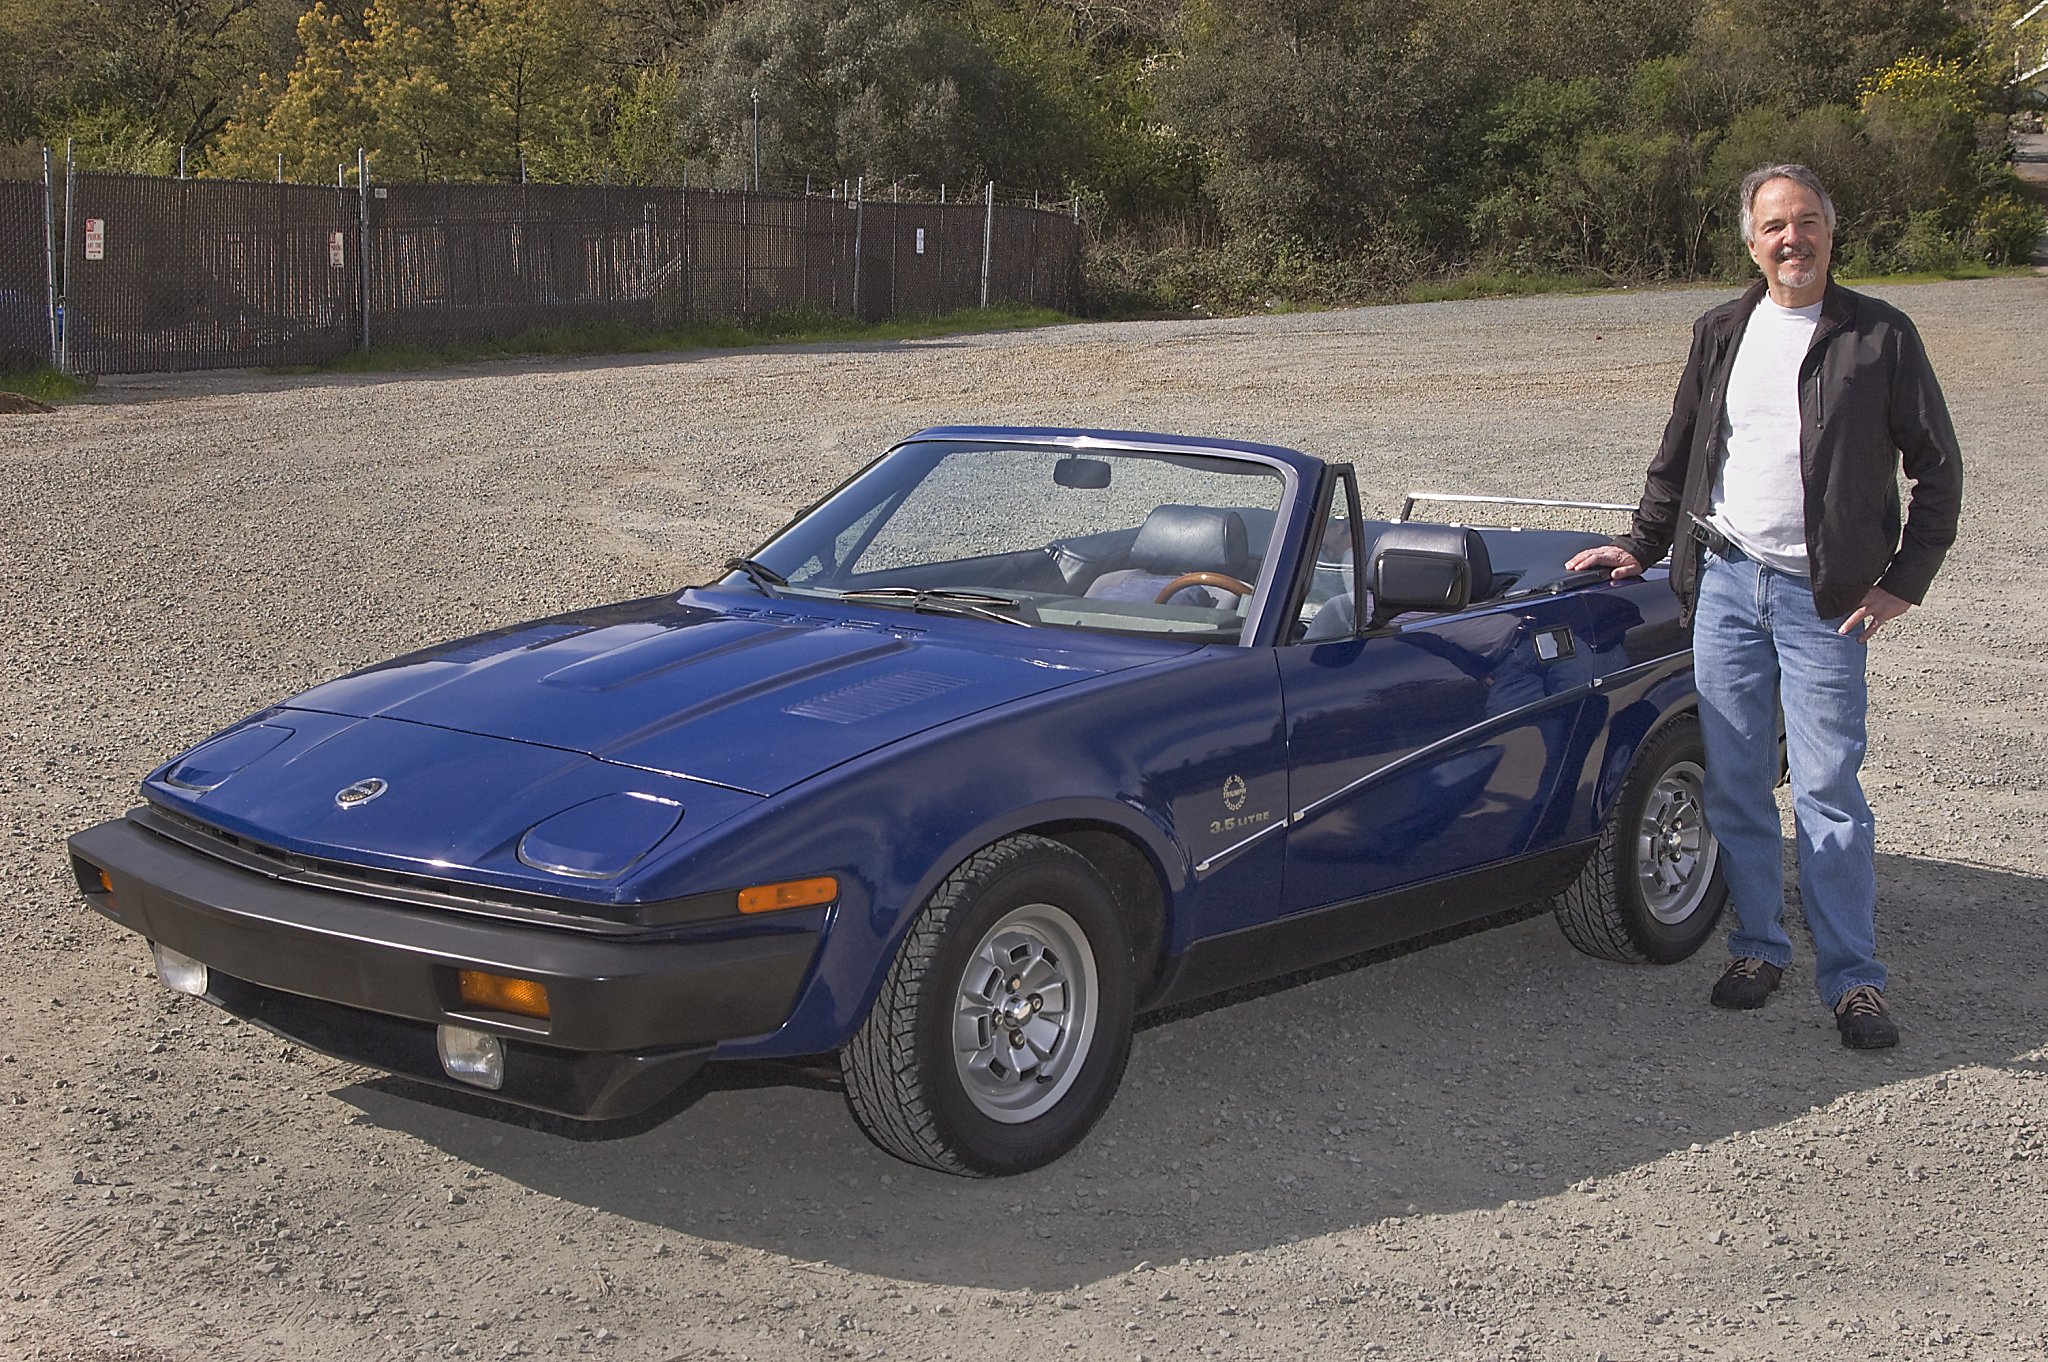 'Love at first sight' with 1981 Triumph TR8 - SFGate2048 x 1362